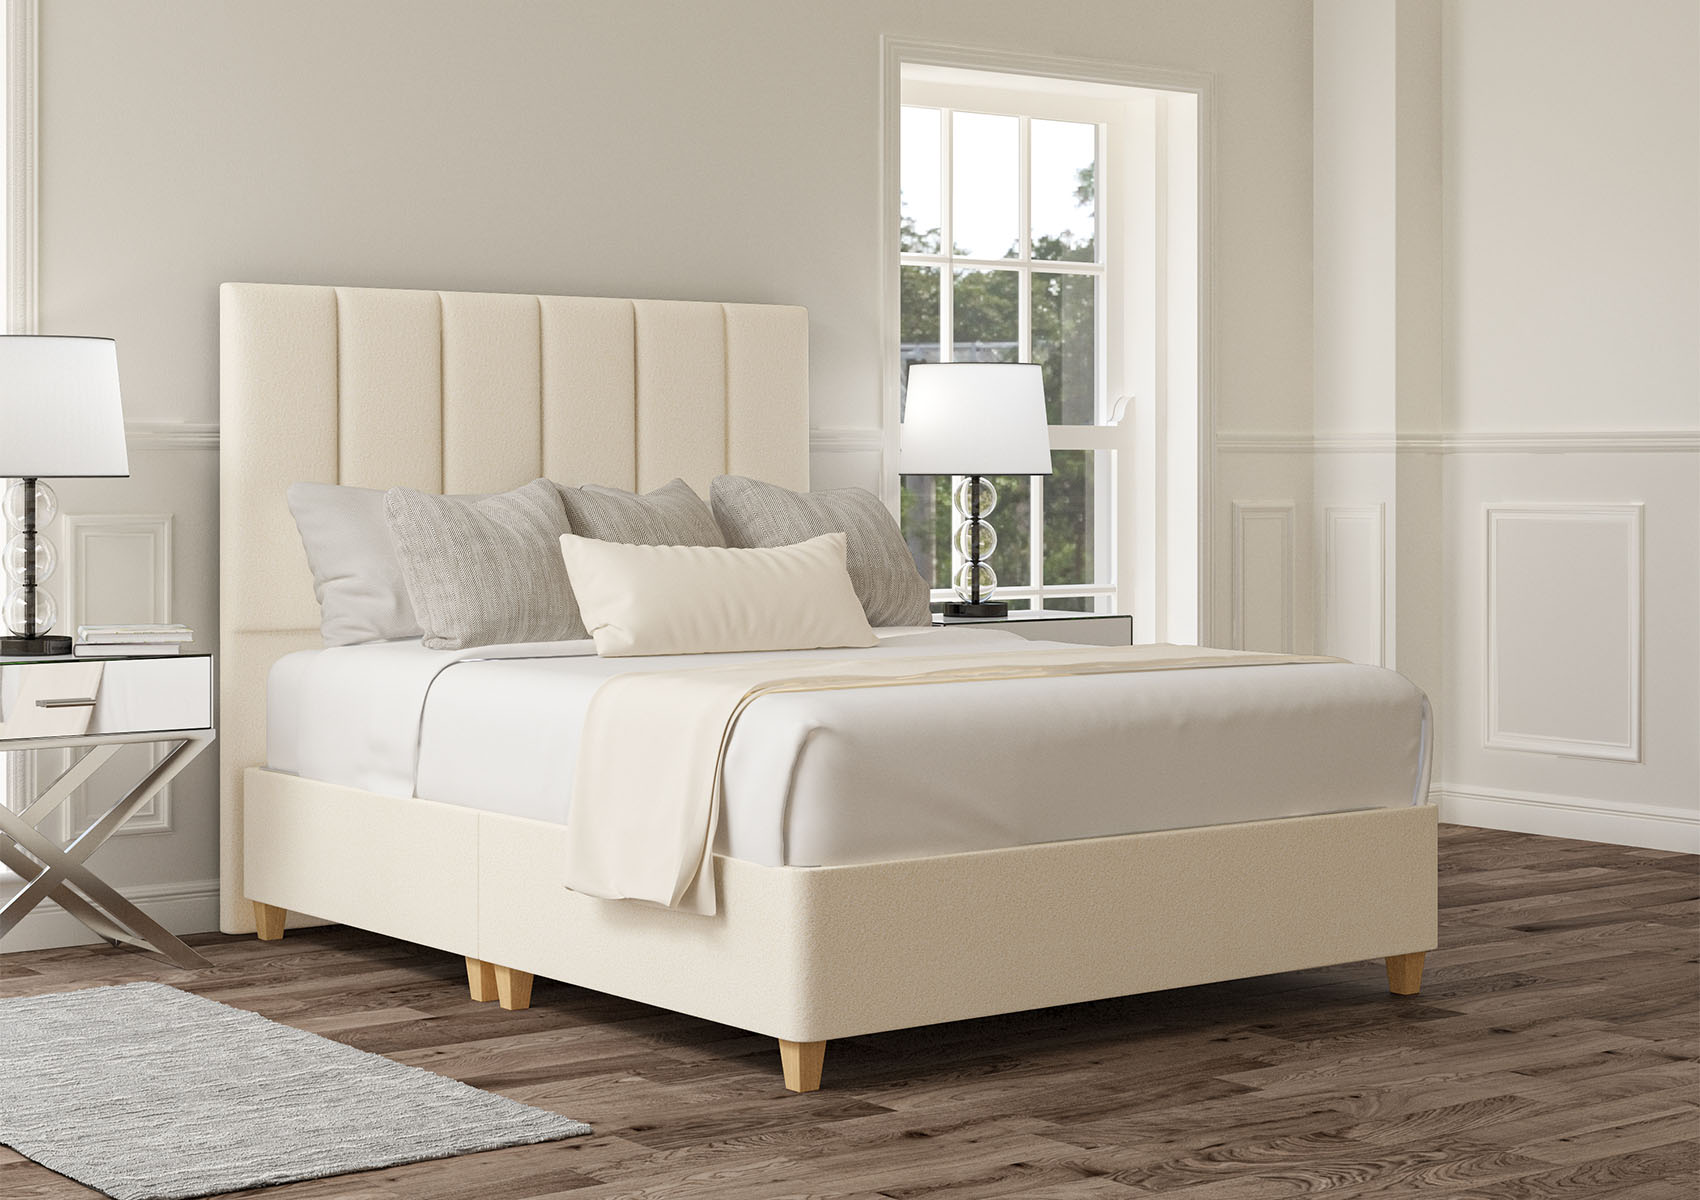 View Empire Arlington Ice Upholstered Single Divan Bed Time4Sleep information